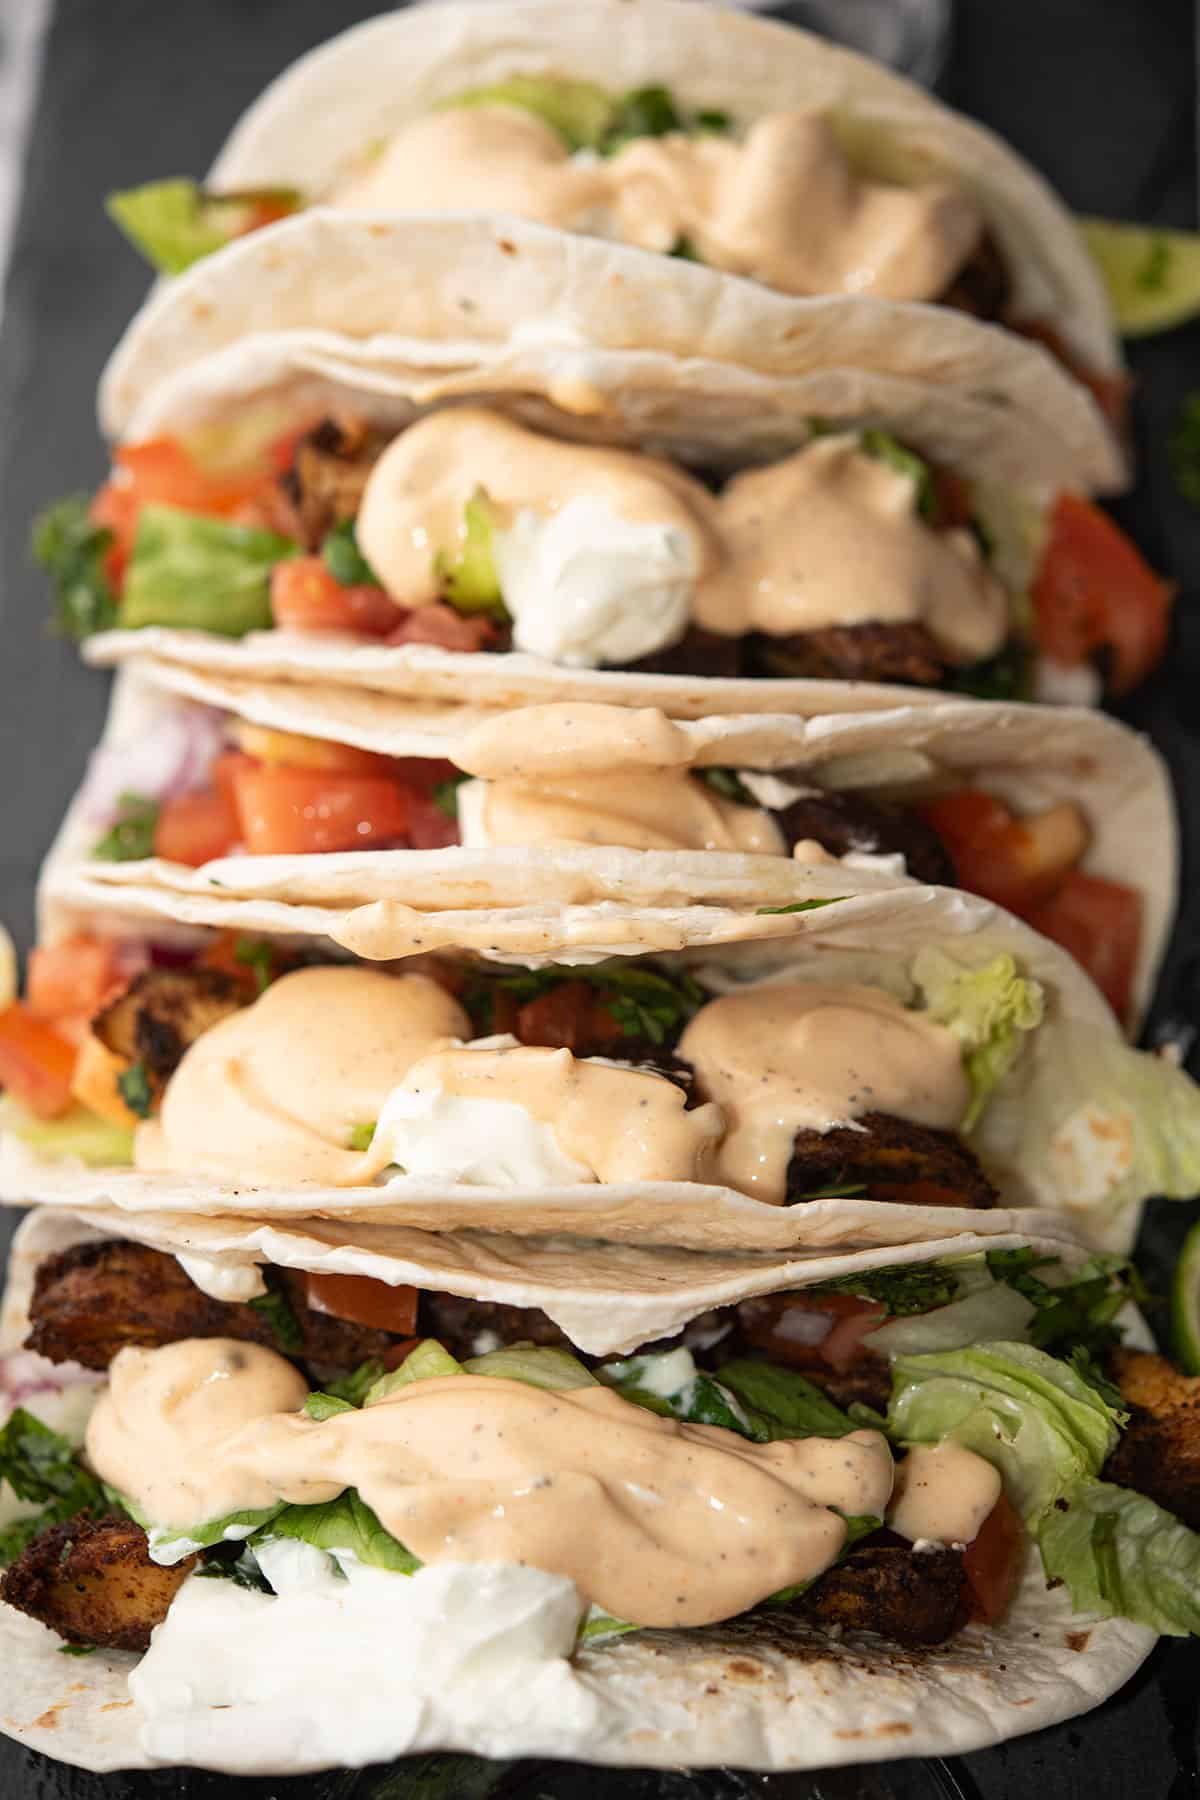 drizzled sriracha fish taco sauce over the soft tacos